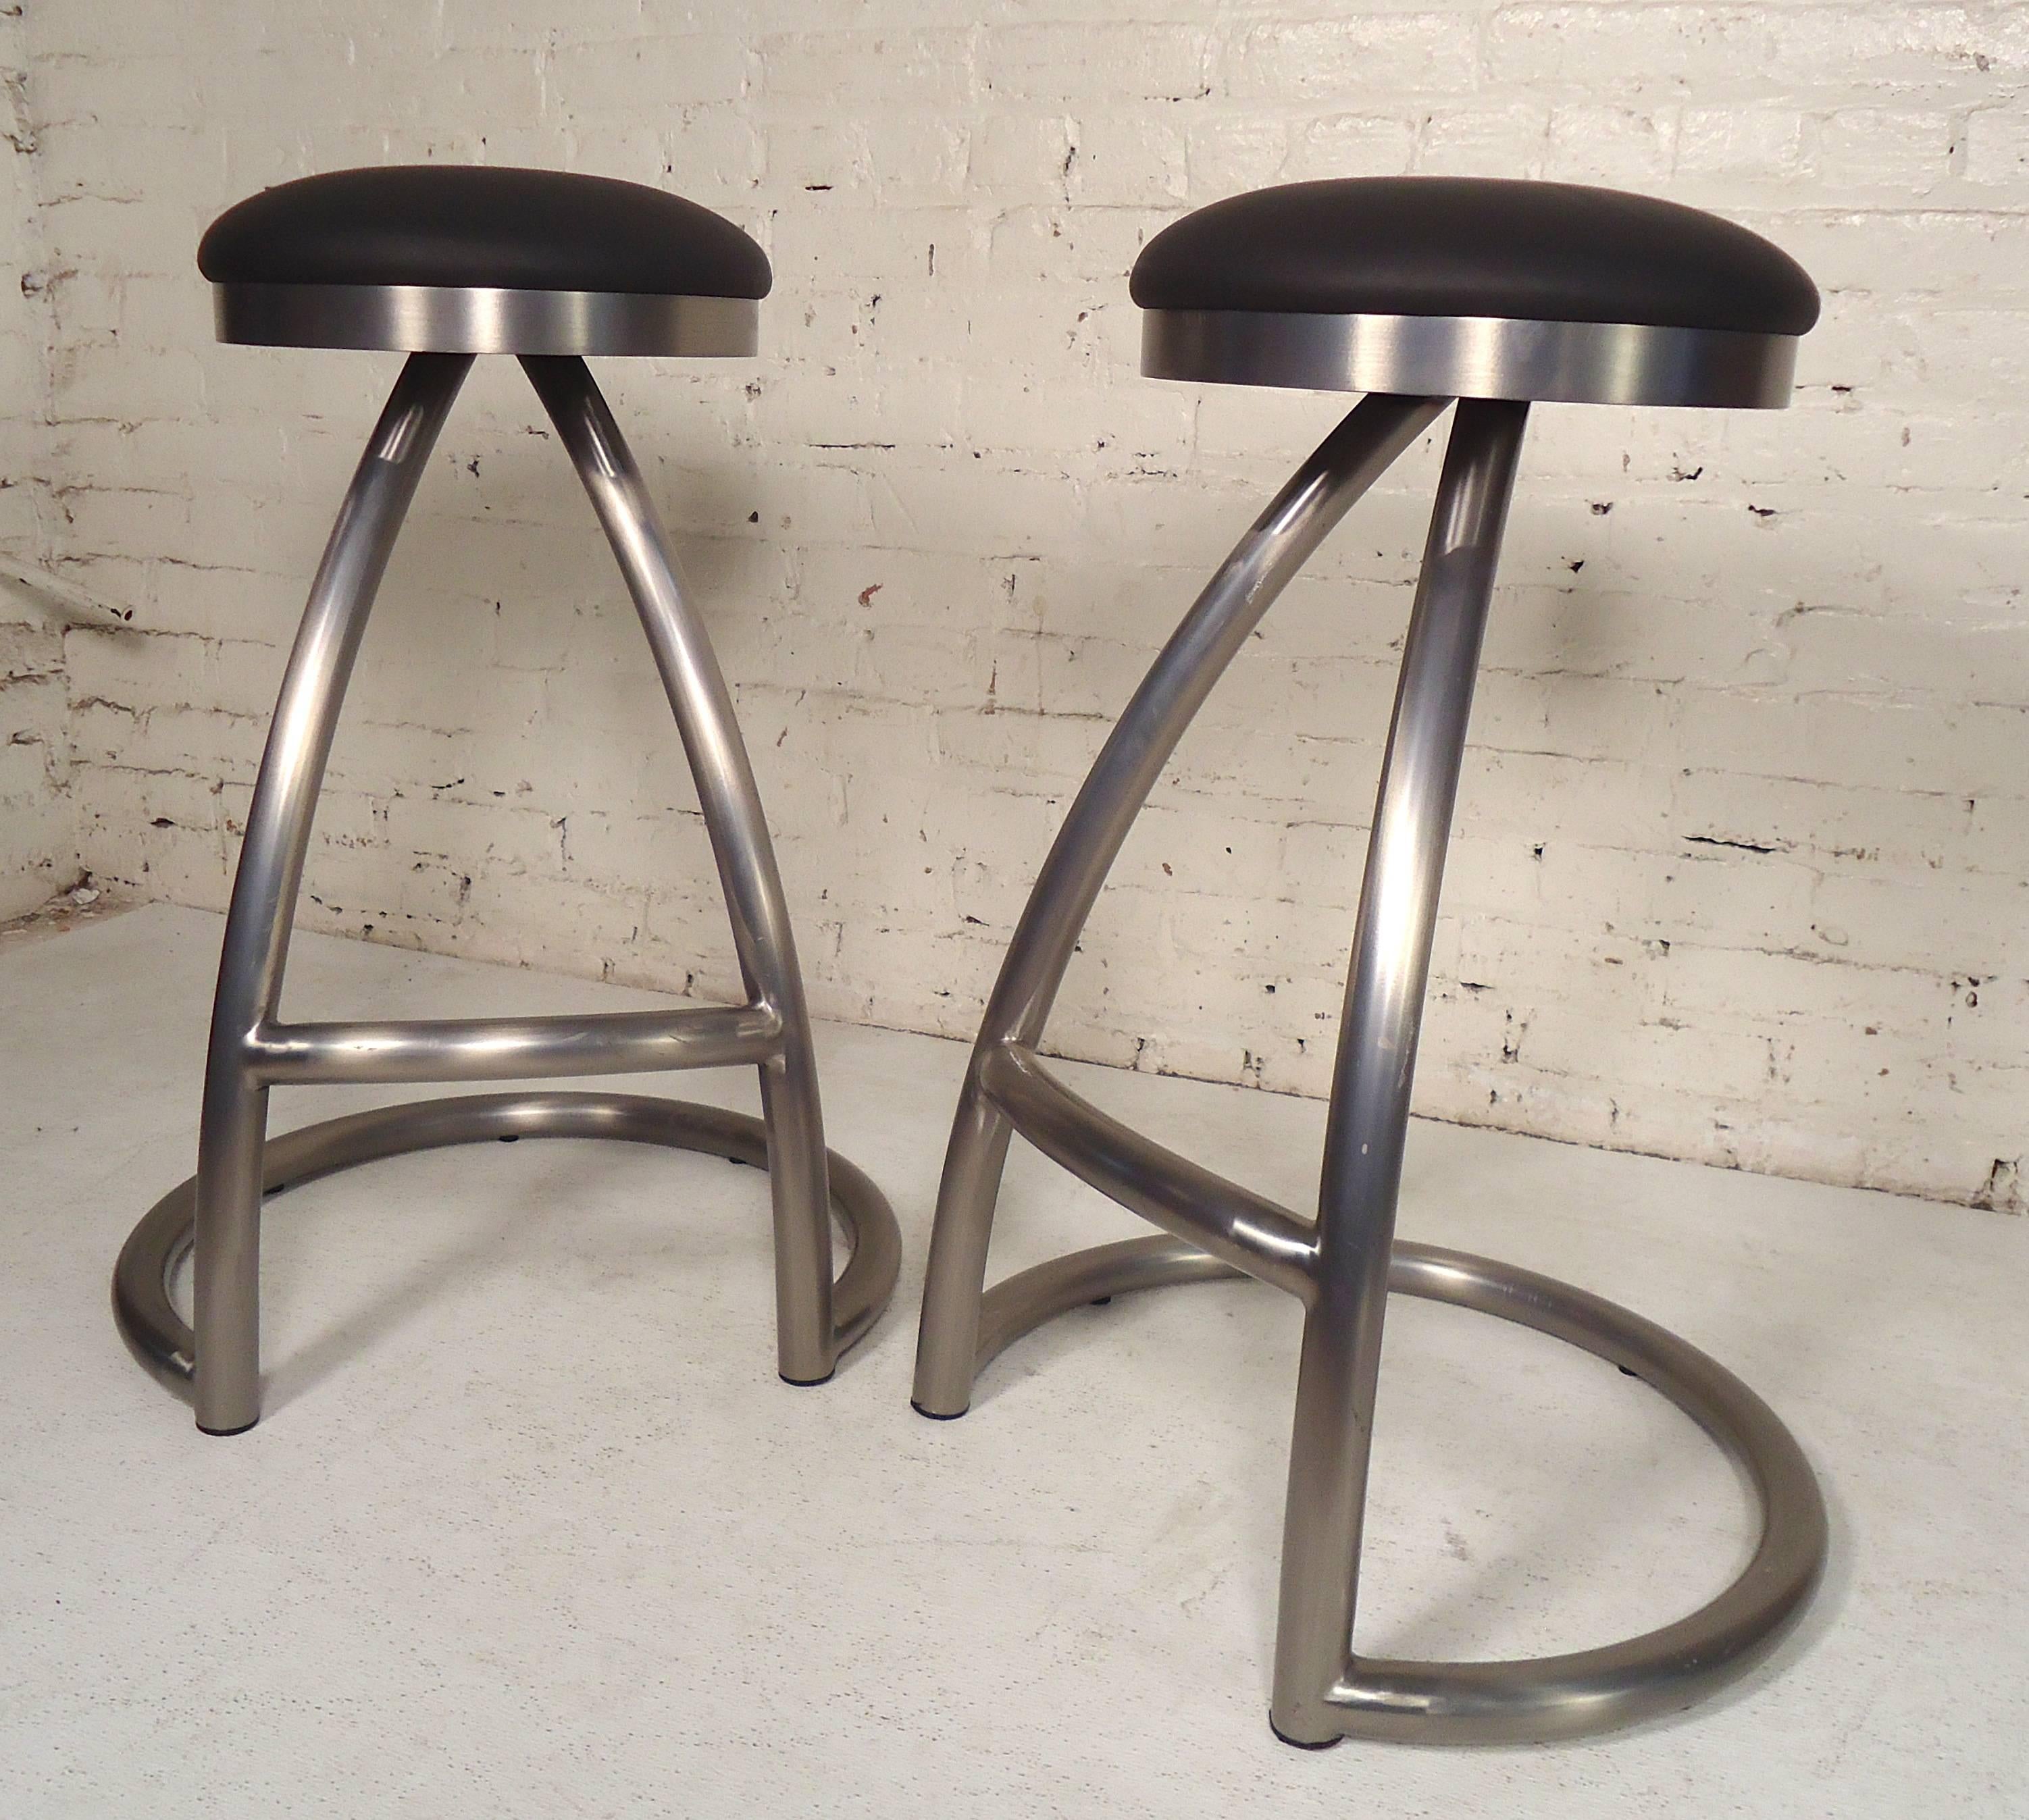 Four heavy stools with black cushioned seats. Thick metal frames with footrests.

(Please confirm item location - NY or NJ - with dealer).
 